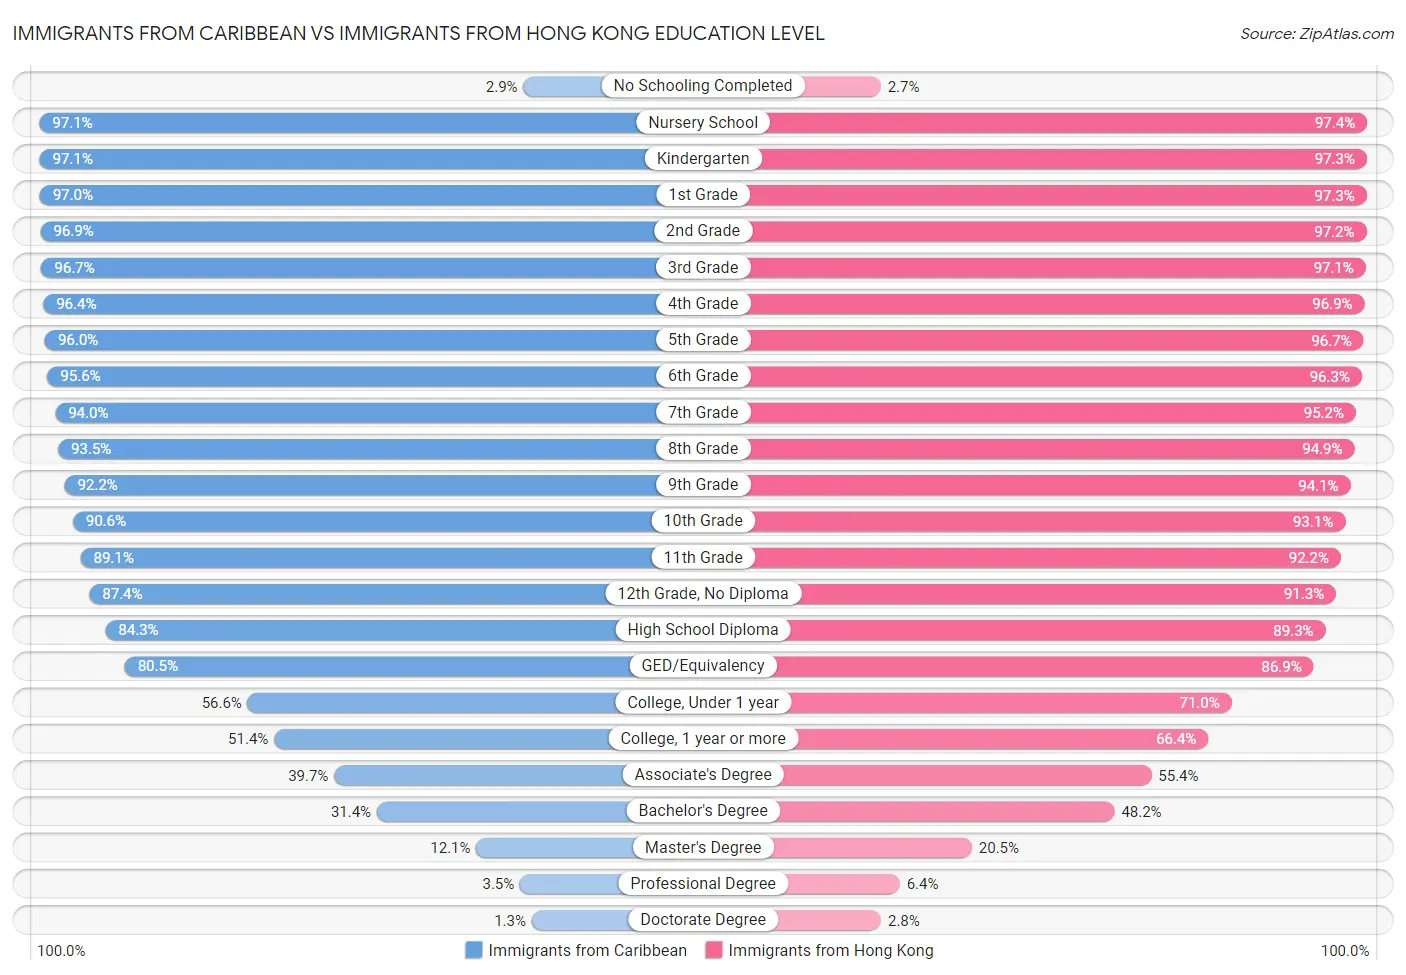 Immigrants from Caribbean vs Immigrants from Hong Kong Education Level